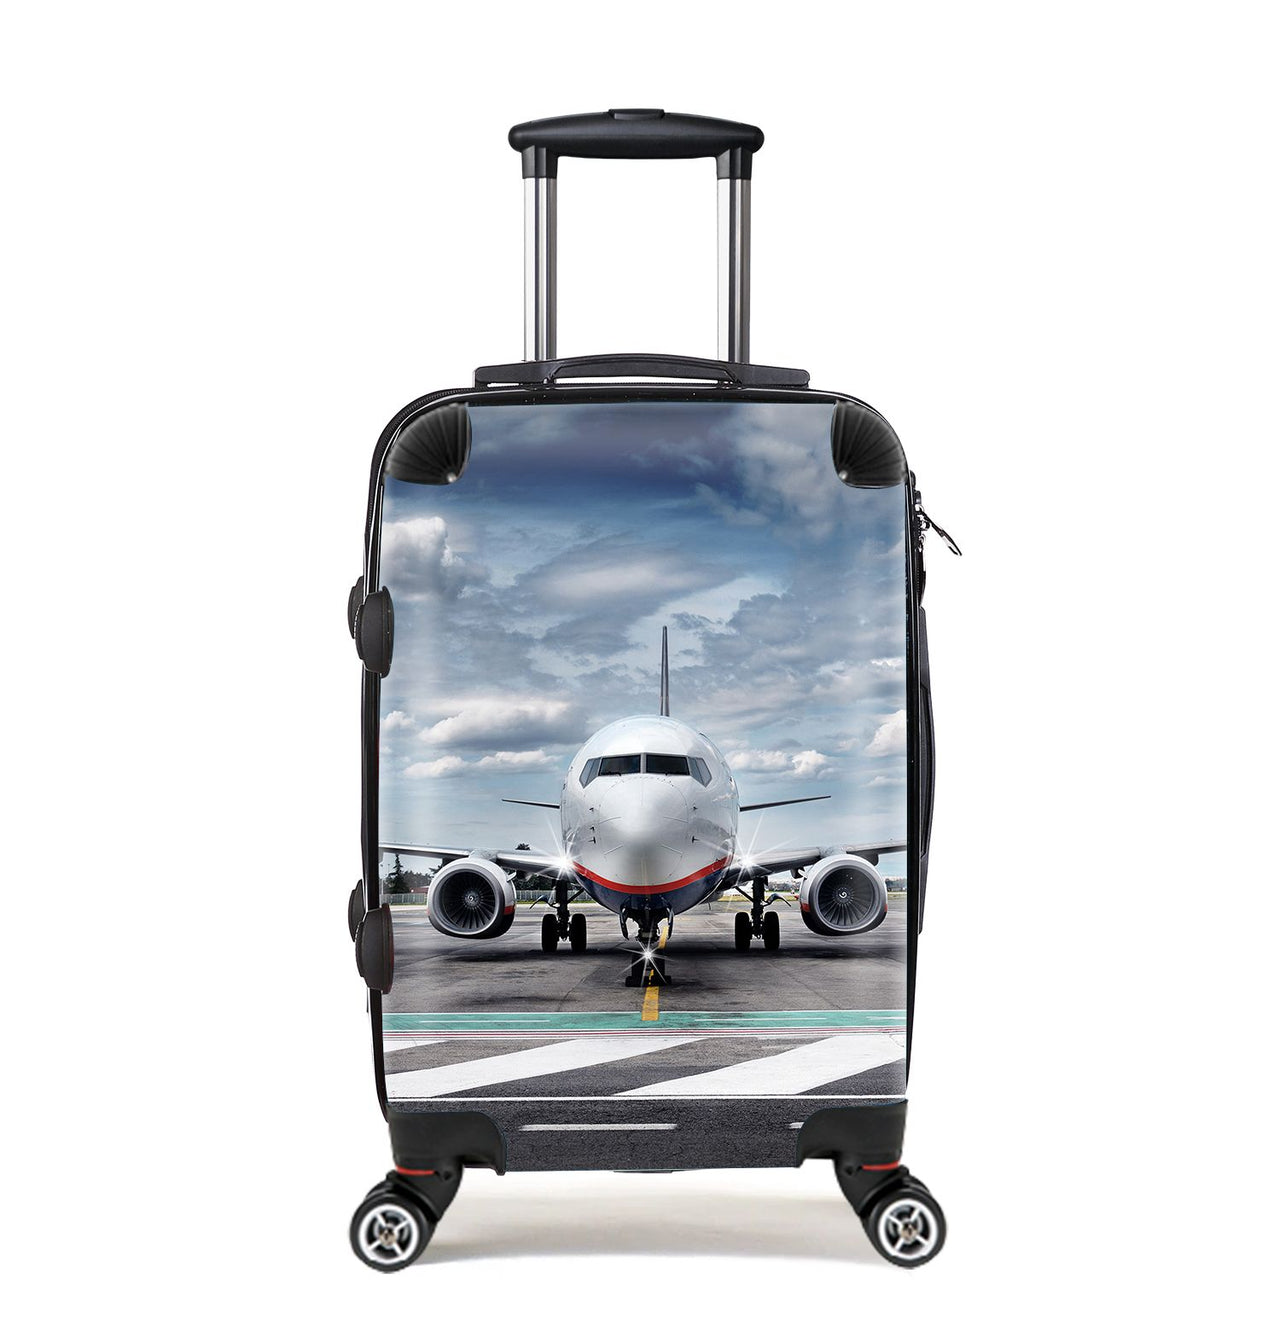 Amazing Clouds and Boeing 737 NG Designed Cabin Size Luggages